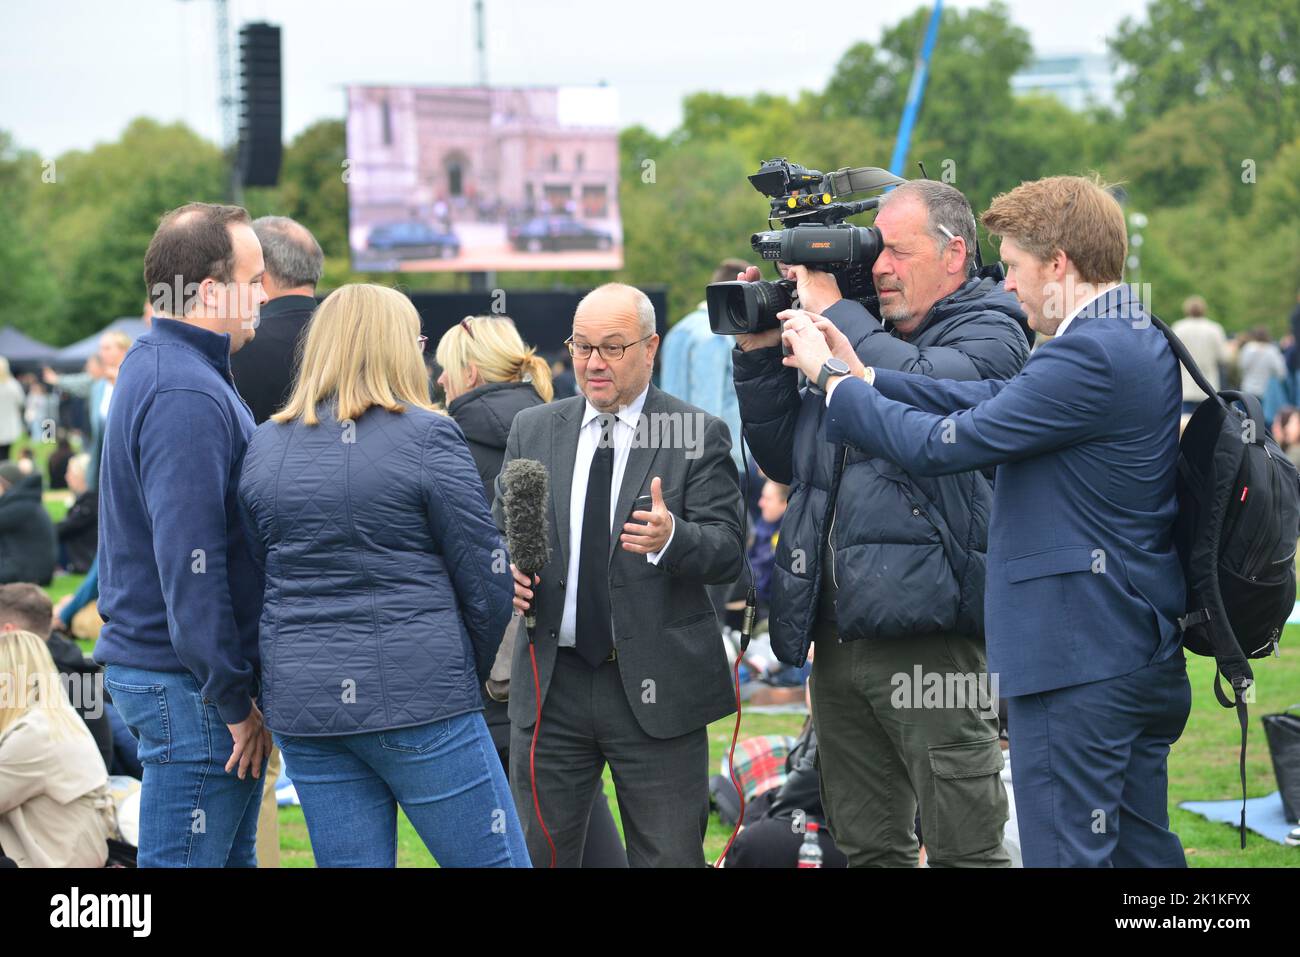 State funeral of Her Majesty Queen Elizabeth II, London, UK, Monday 19th September 2022. A television news crew interviewing people in Hyde Park. Stock Photo